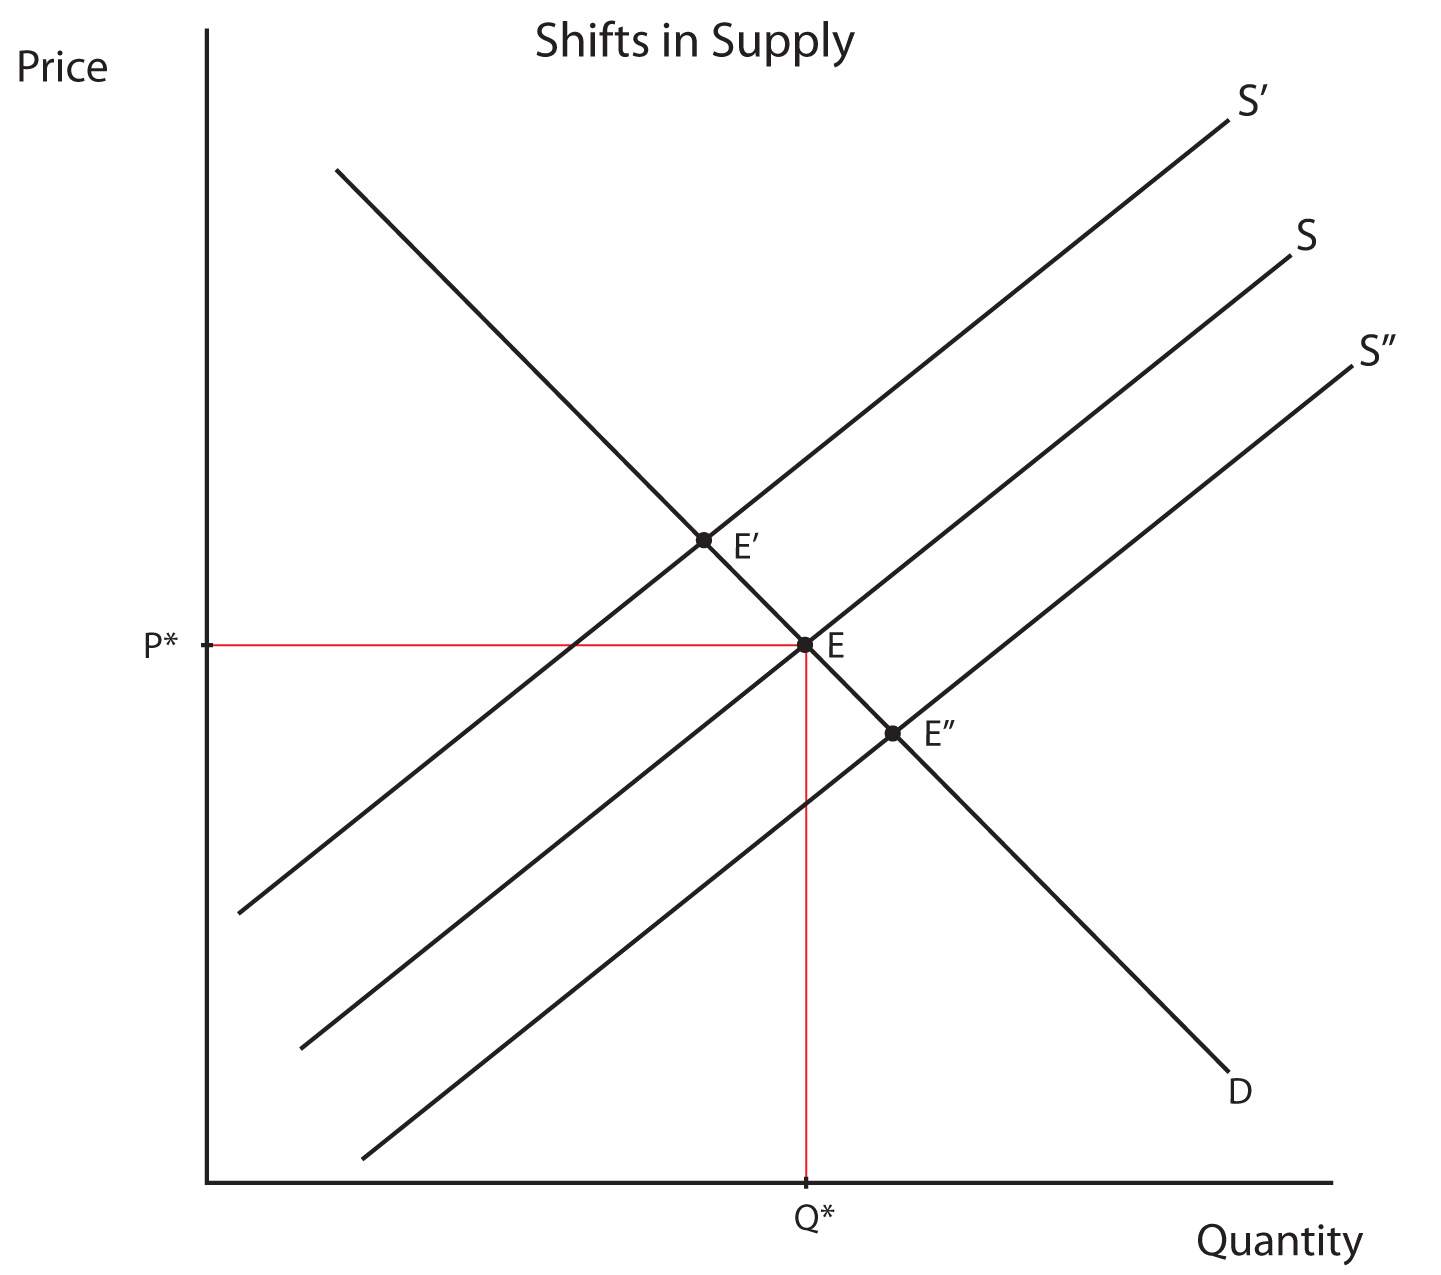 Description: Description: Image 1.14: Shifts in Supply. This image shows a graph with Price on the Y axis and Quantity on the X axis.
Two 45 degree angle lines cross at a point labeled E. Point E is connected by a horizontal line to a point labeled P* on the Y axis and by a vertical line to a point labeled Q* on the X axis.  Line D slopes downward from the Y axis to the X axis, and line S slopes upward away from the origin.  A parallel line to the right of line S is labeled S Prime Prime.  The point where D intersects line S Prime Prime is labeled E Prime Prime.  Another parallel line to the left of line S is labeled S Prime.  The point where S Prime intersects line D is labeled E Prime.